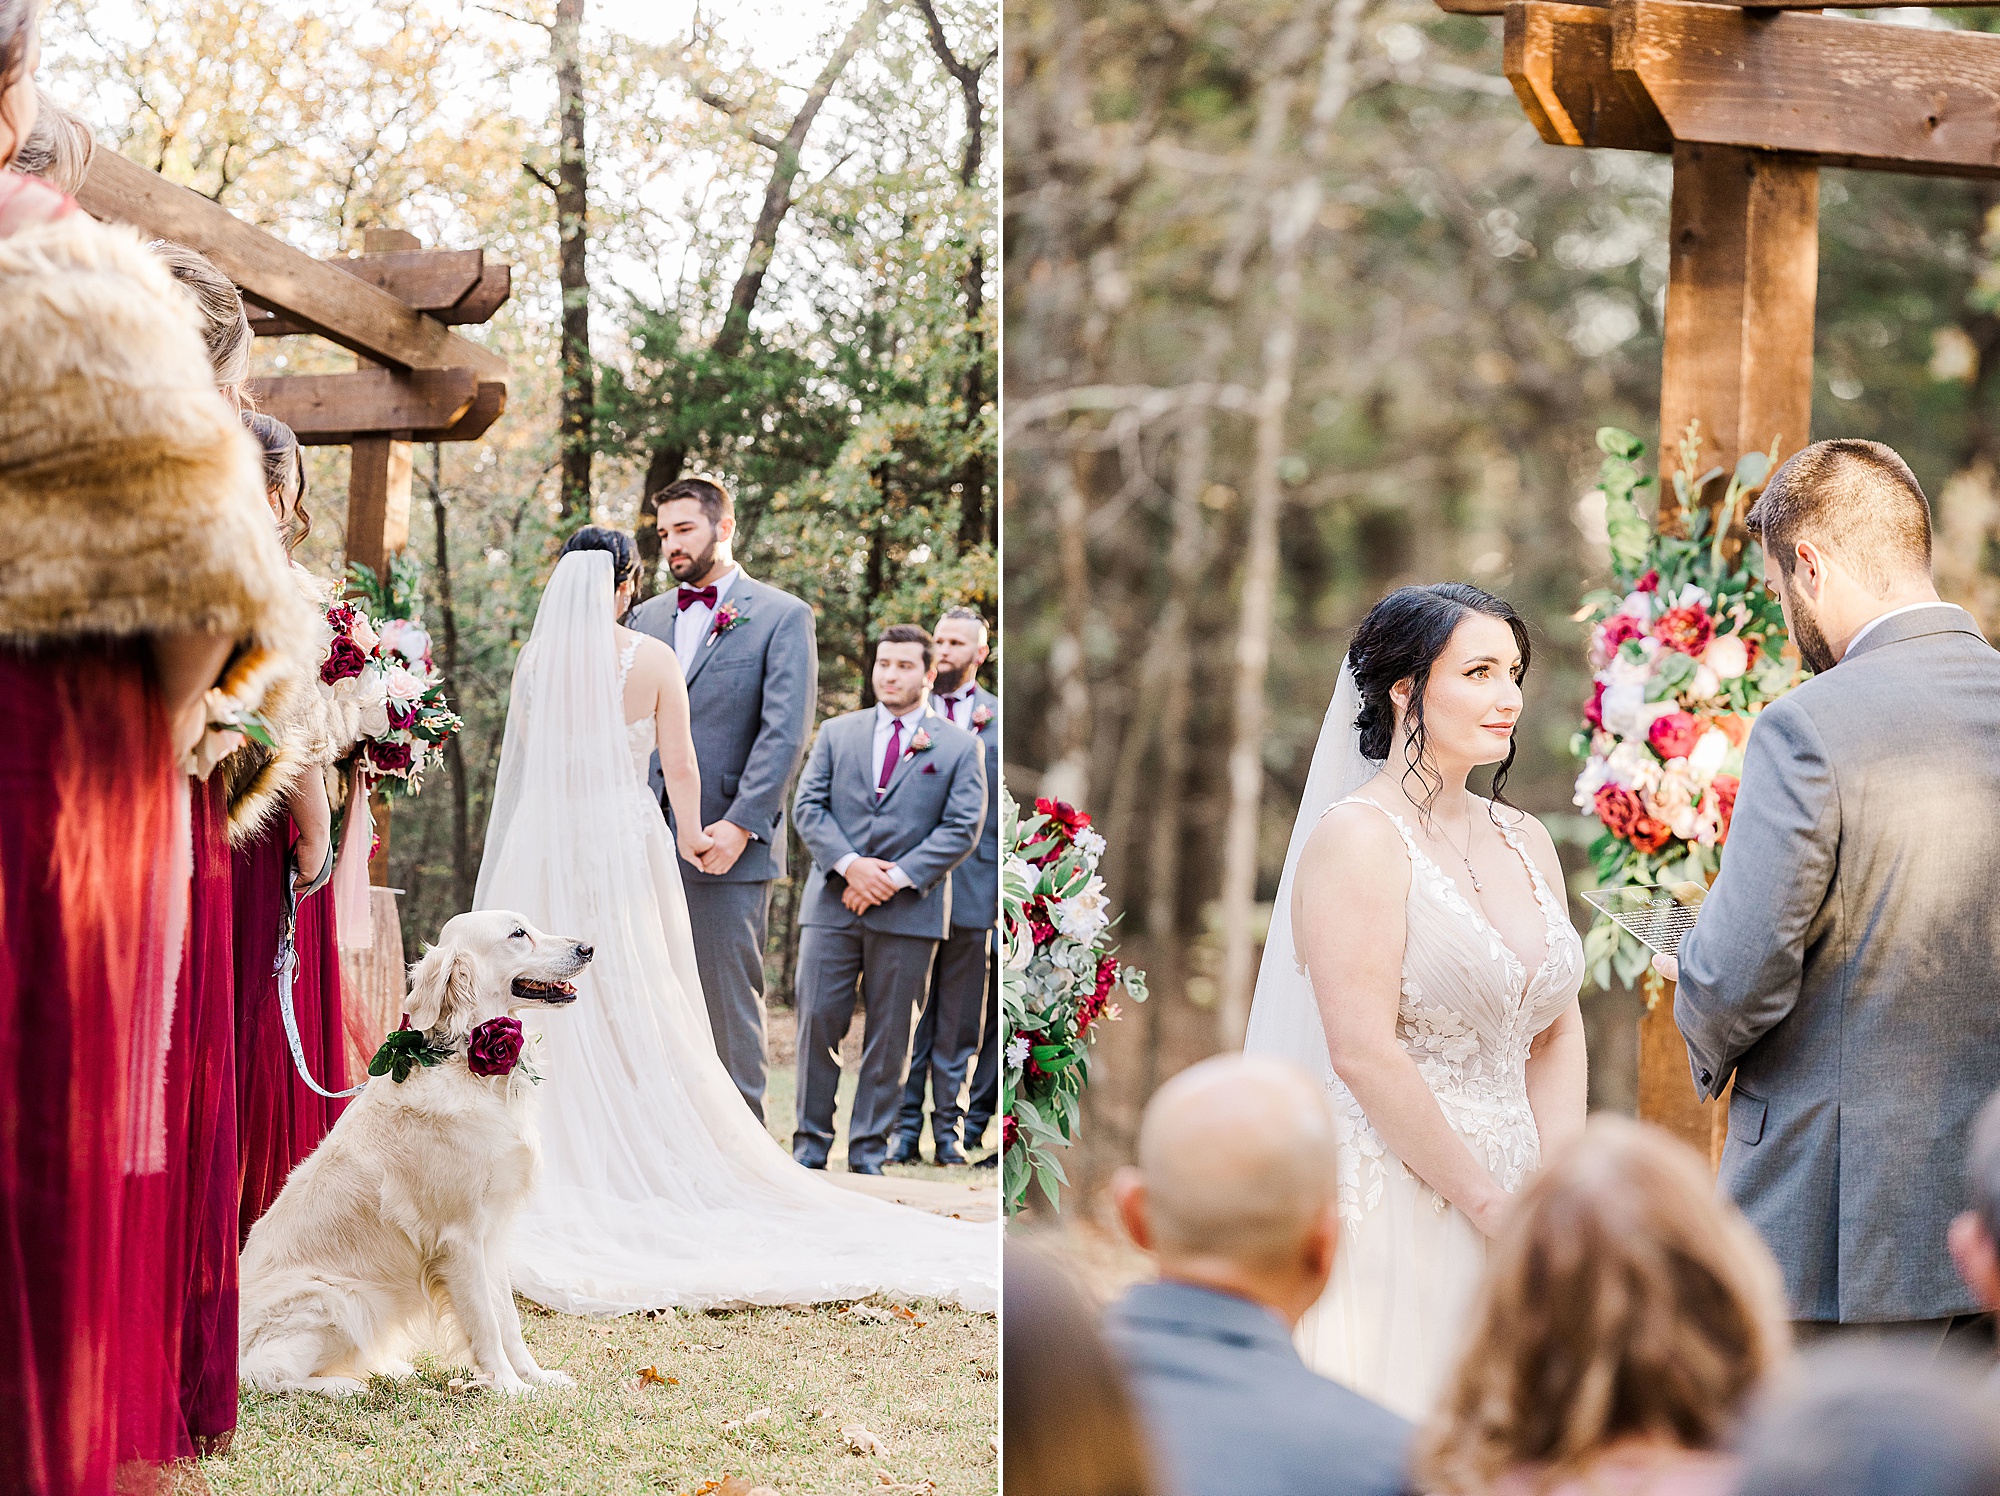 outdoor wedding ceremony in North Texas with dogs